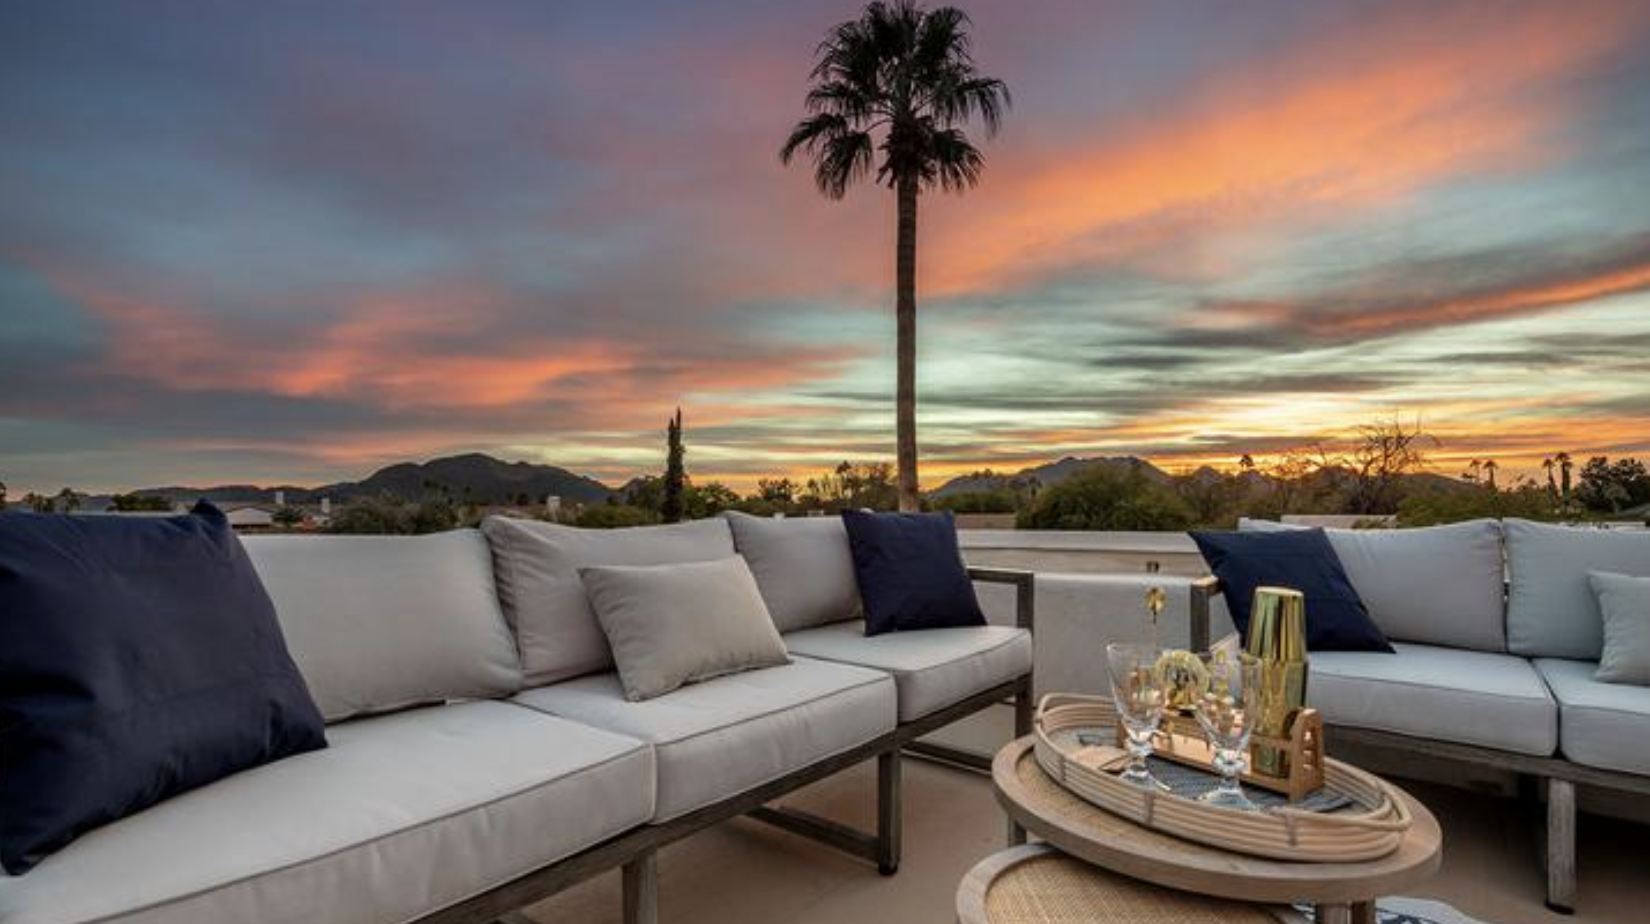 As Super Bowl looms, Valley homeowners prepare to rent out luxury homes